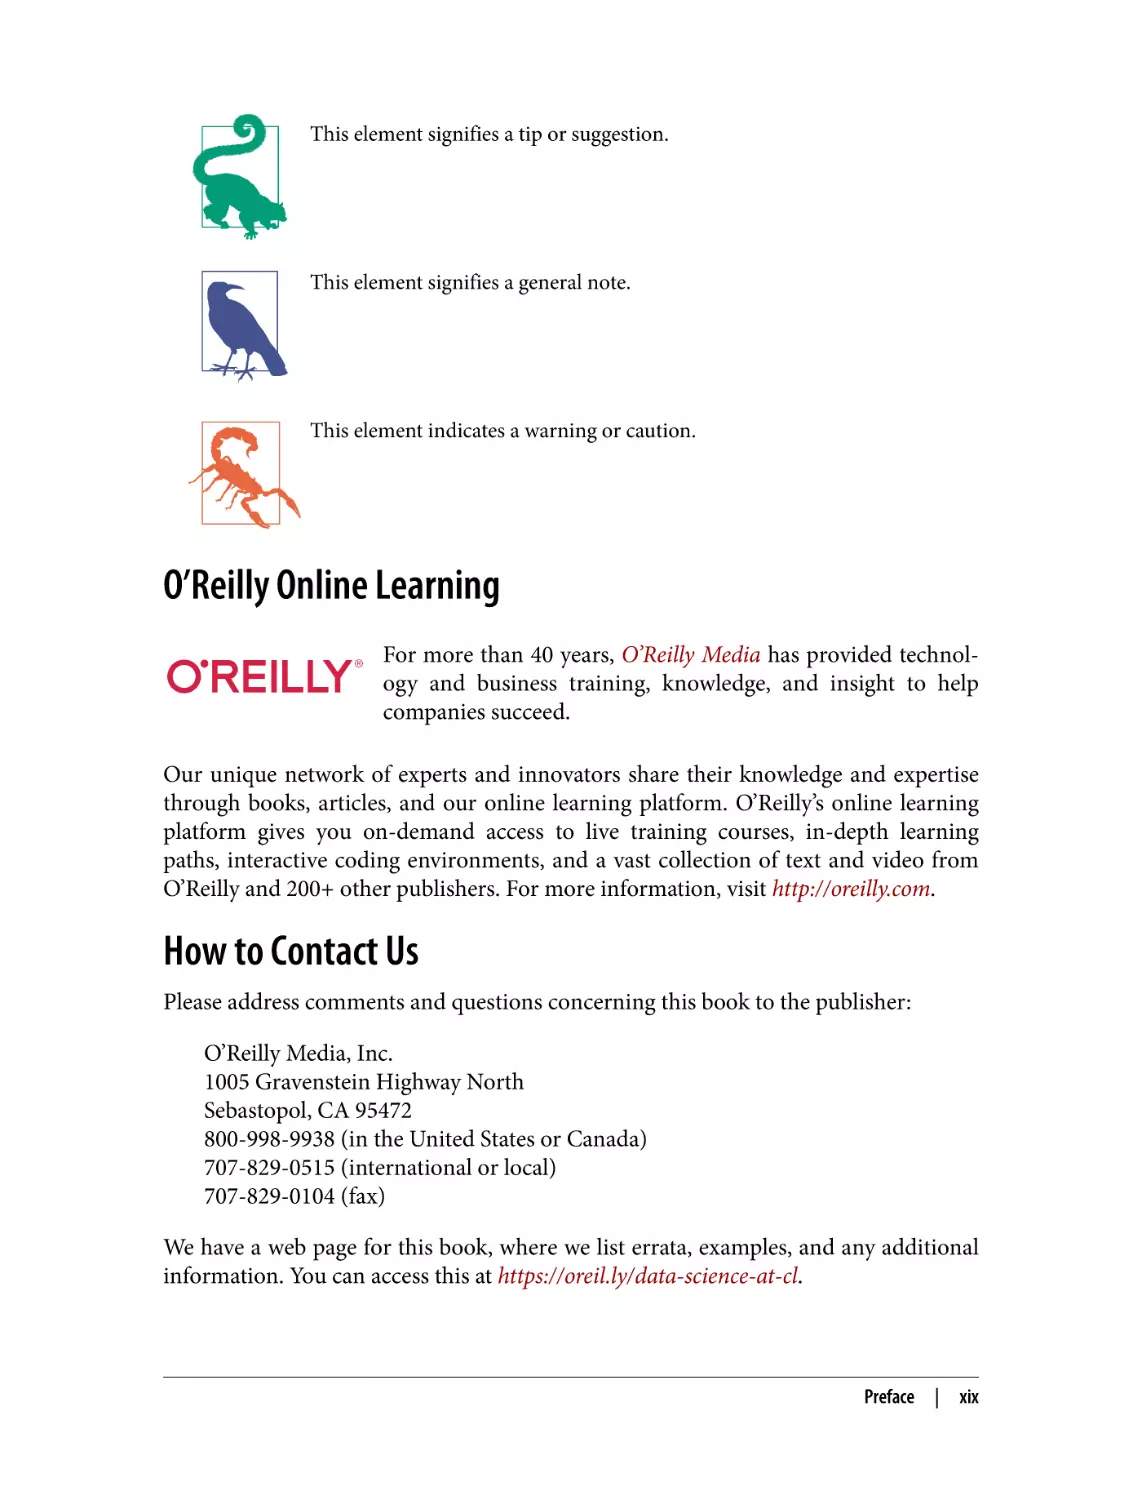 O’Reilly Online Learning
How to Contact Us